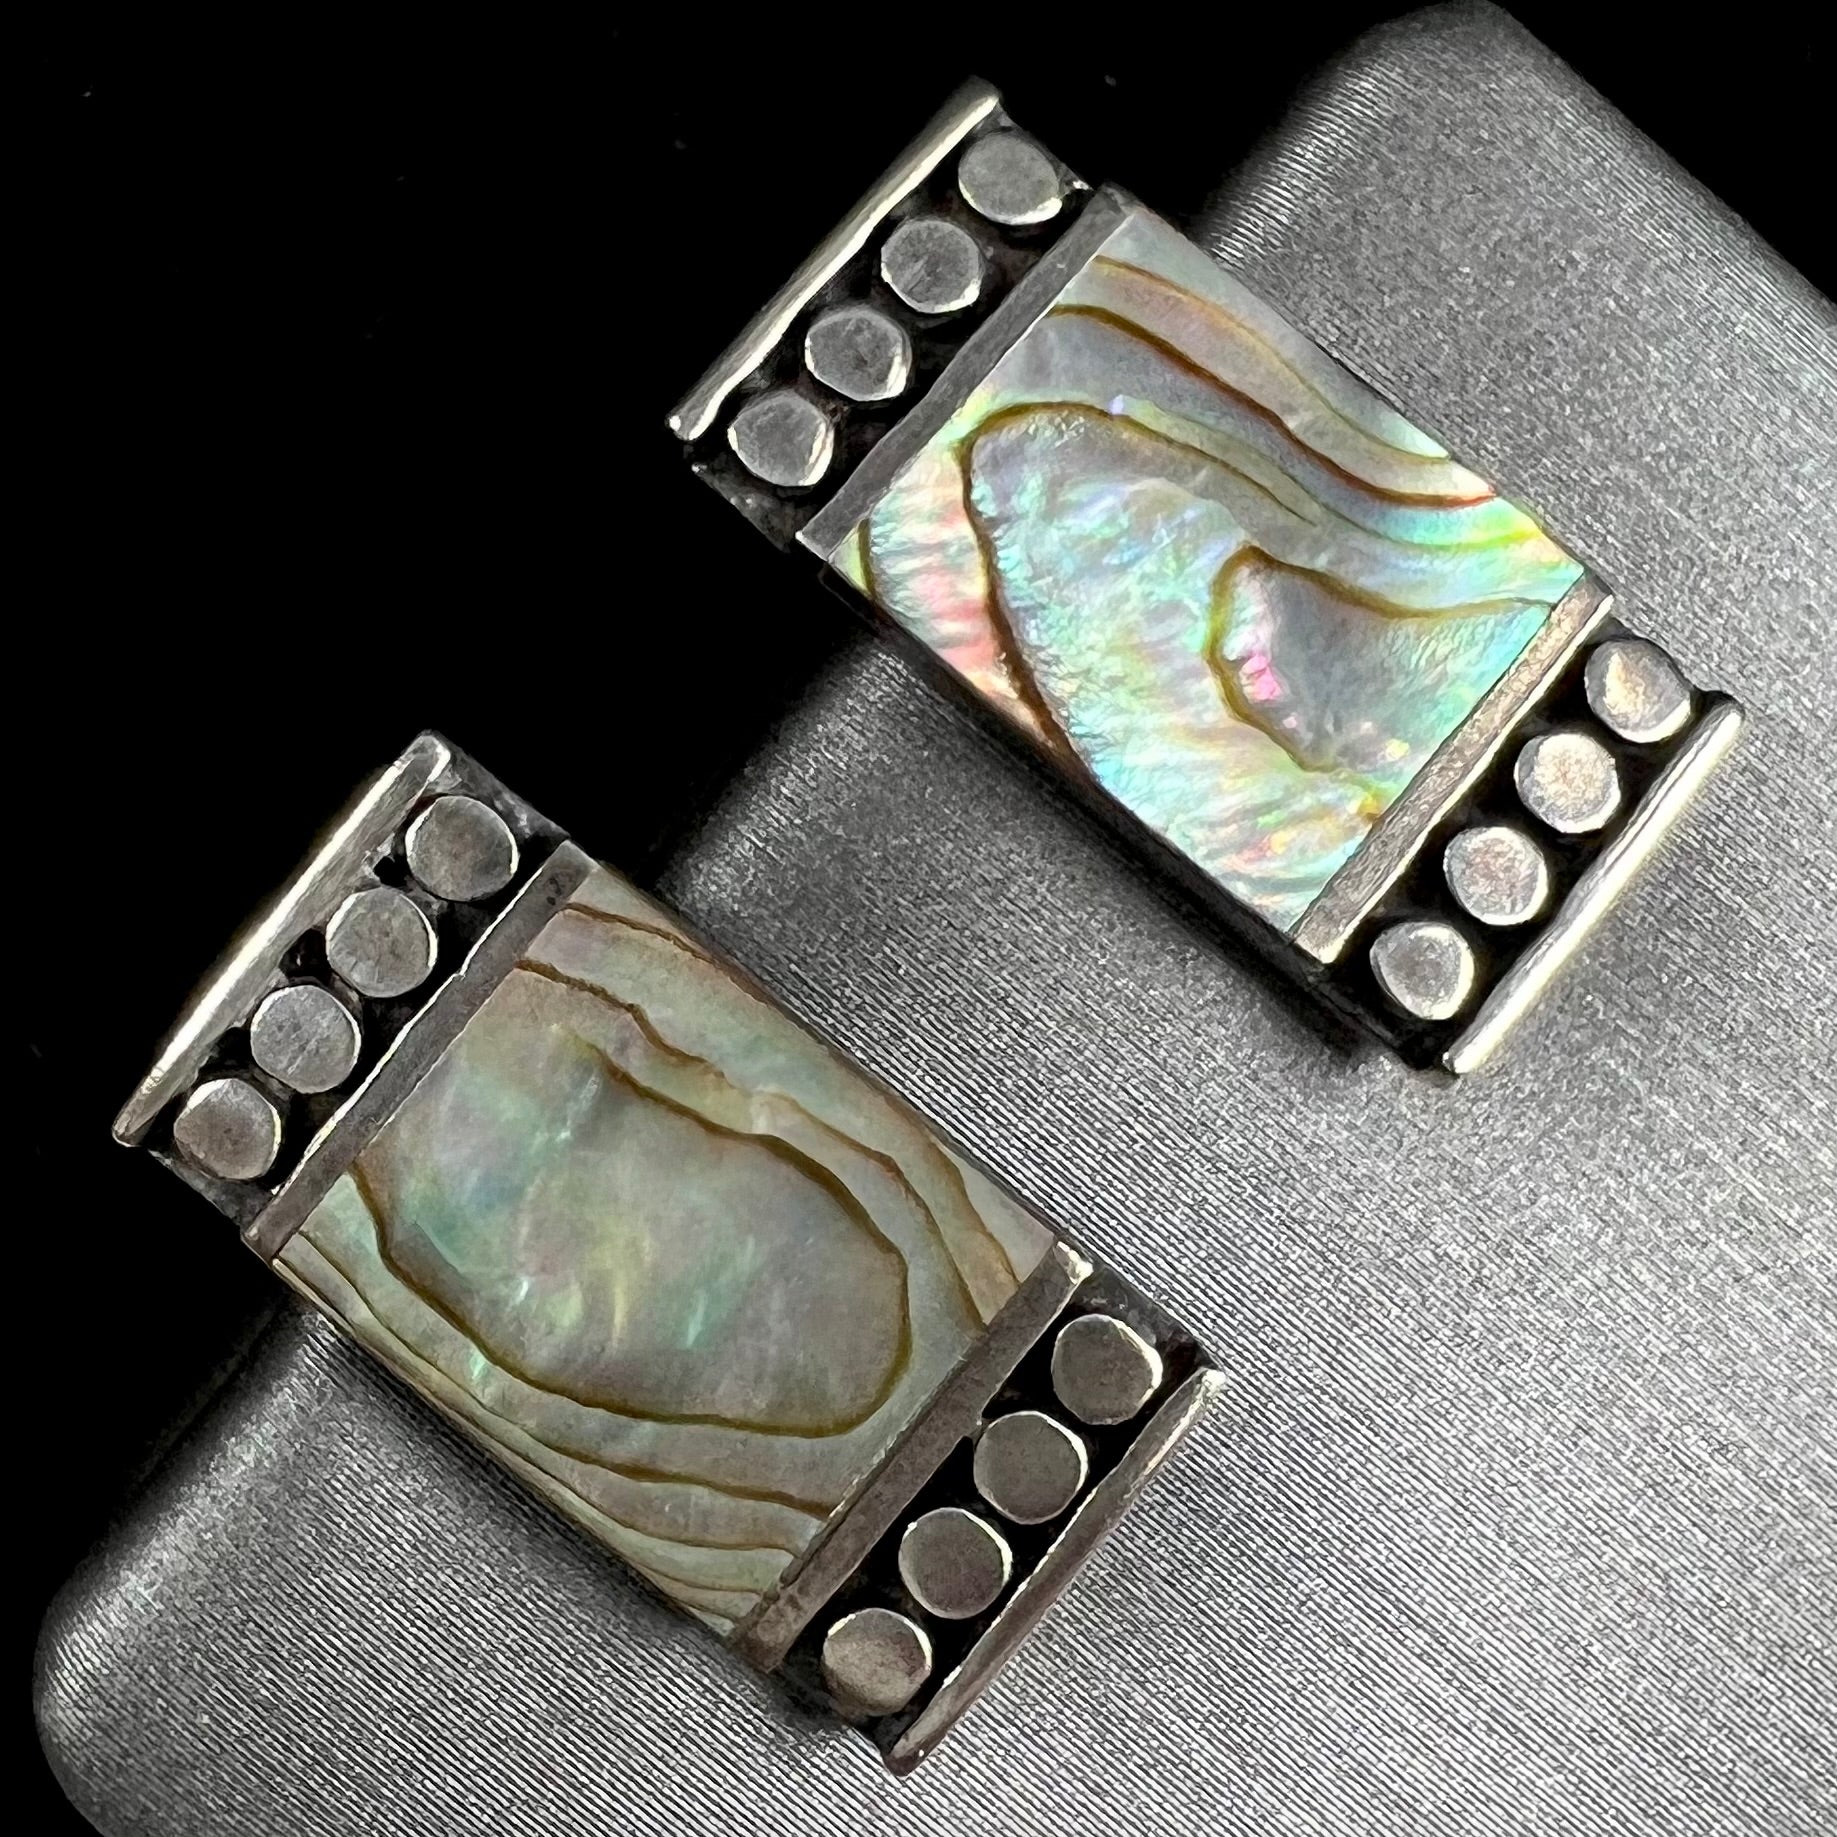 A pair of mother of pearl shell earrings set in sterling silver.